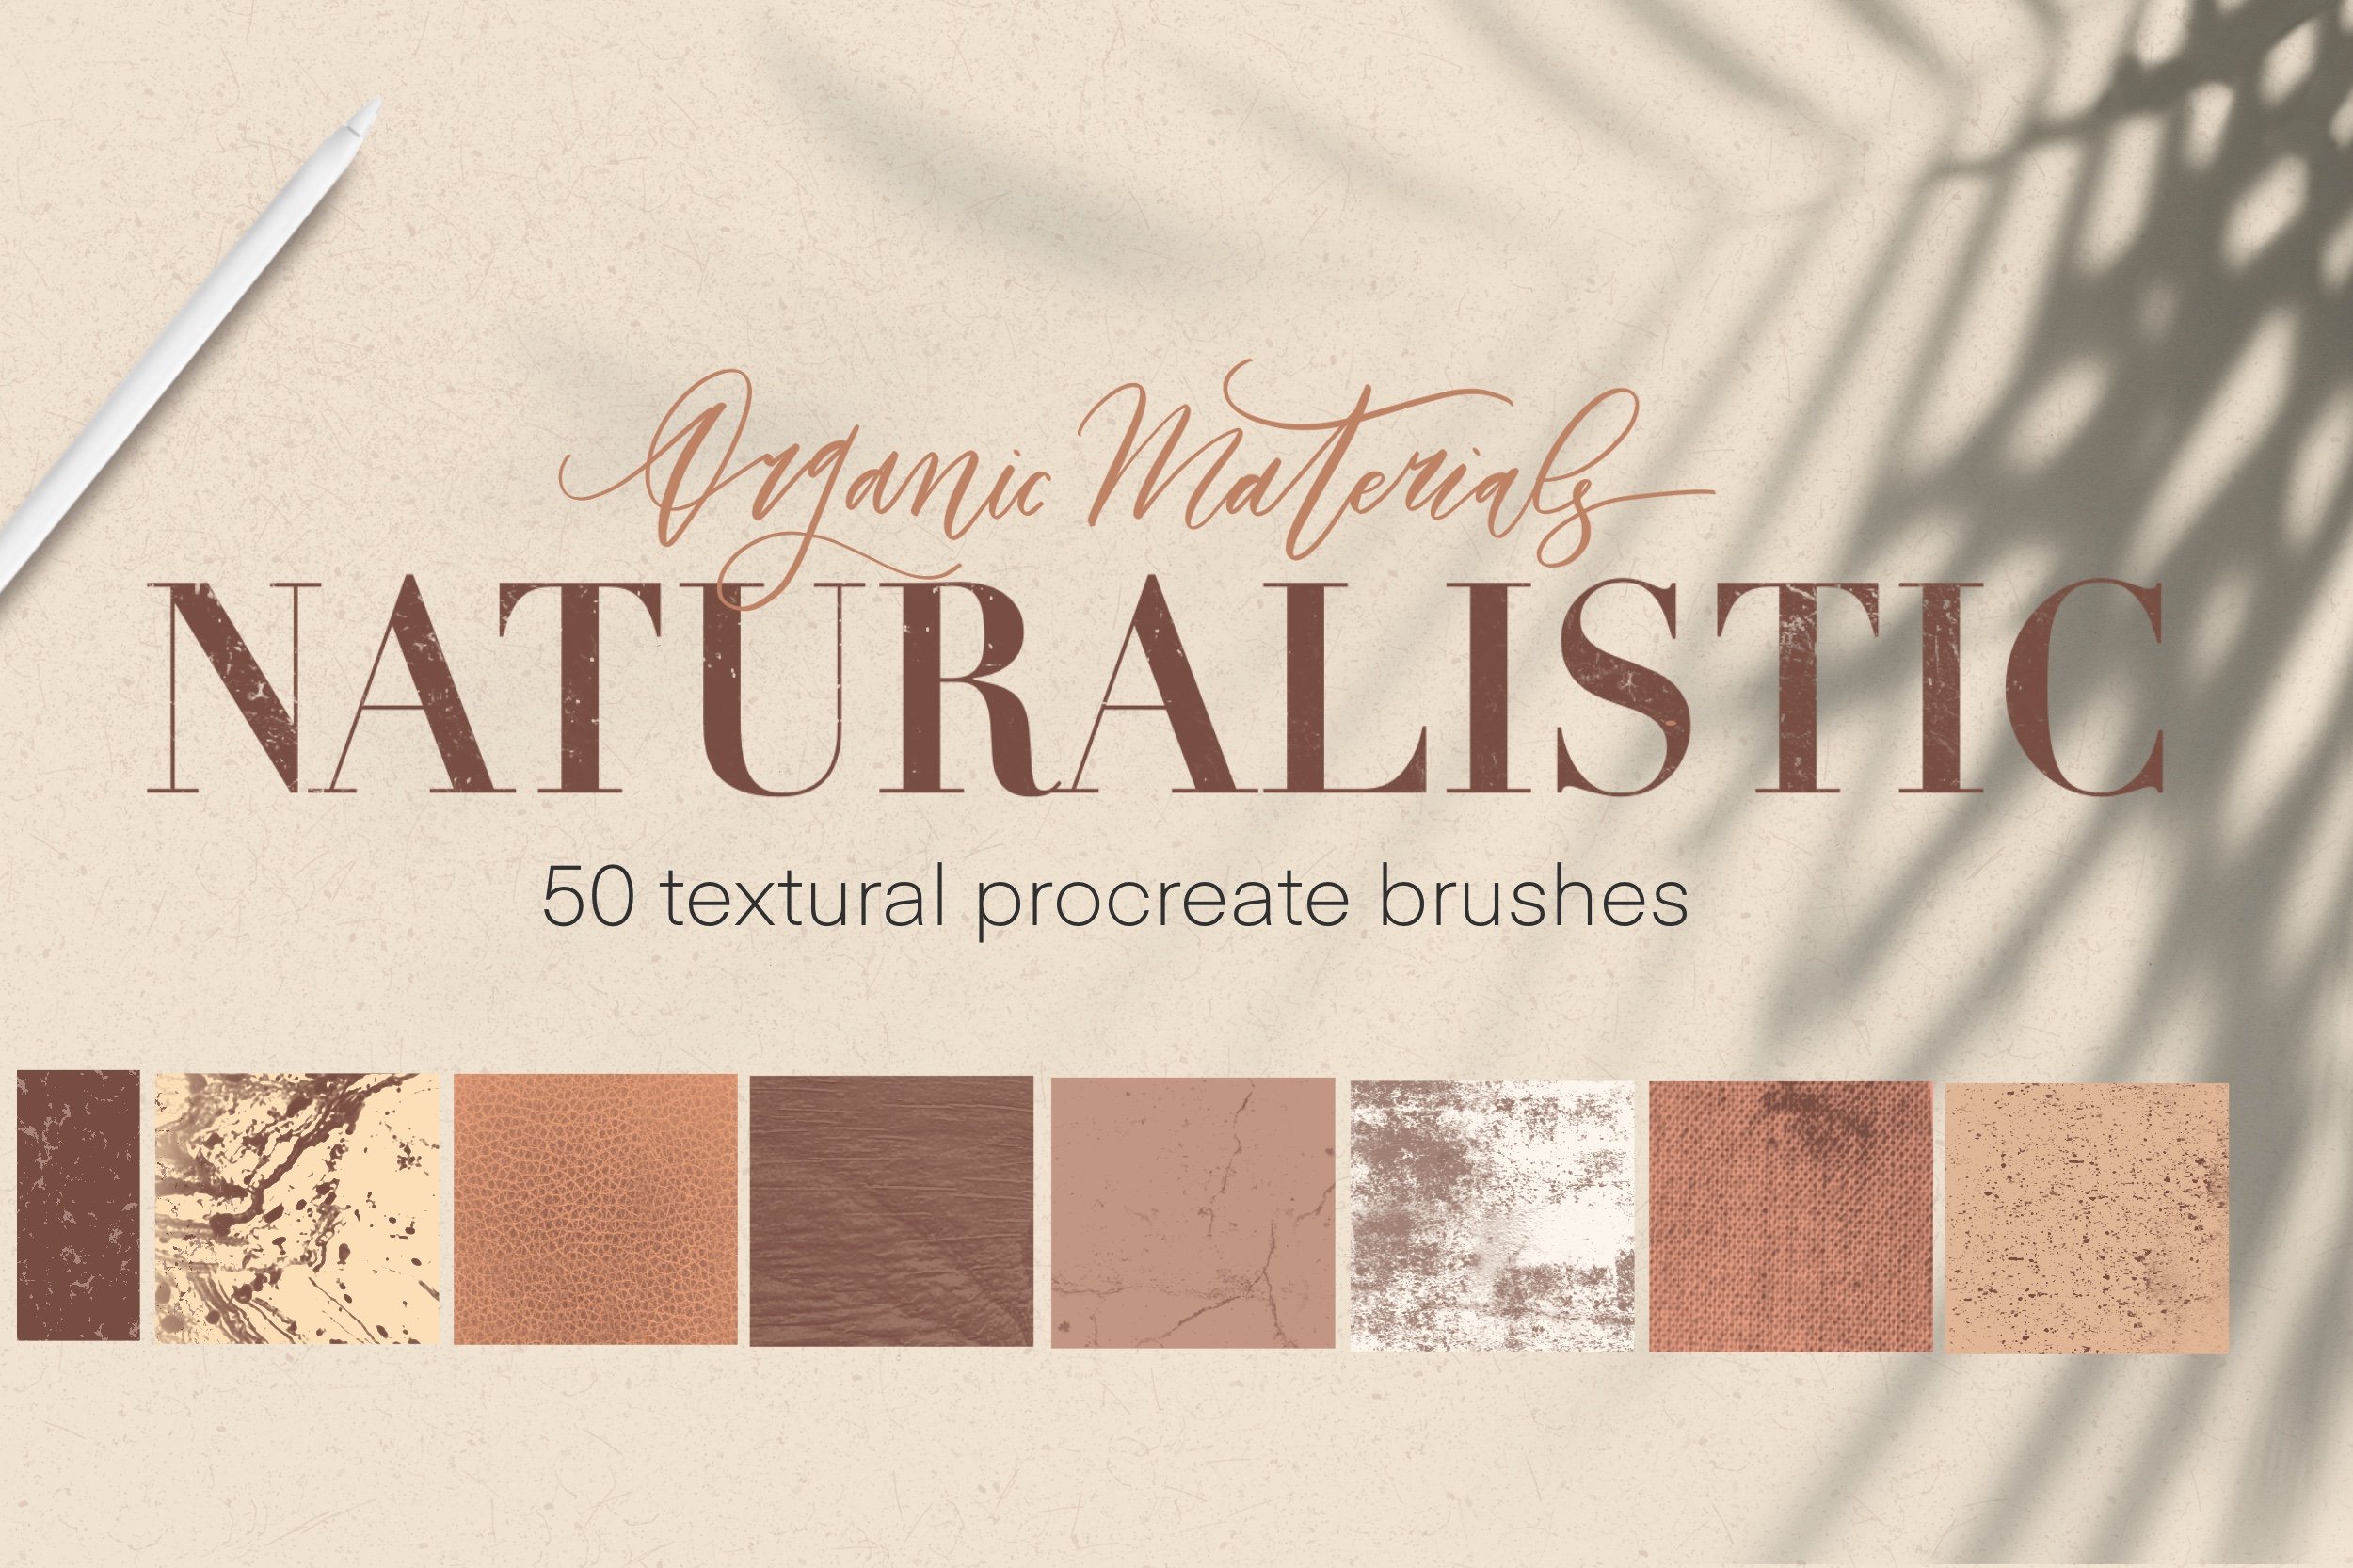 Naturalistic Textures cover image.